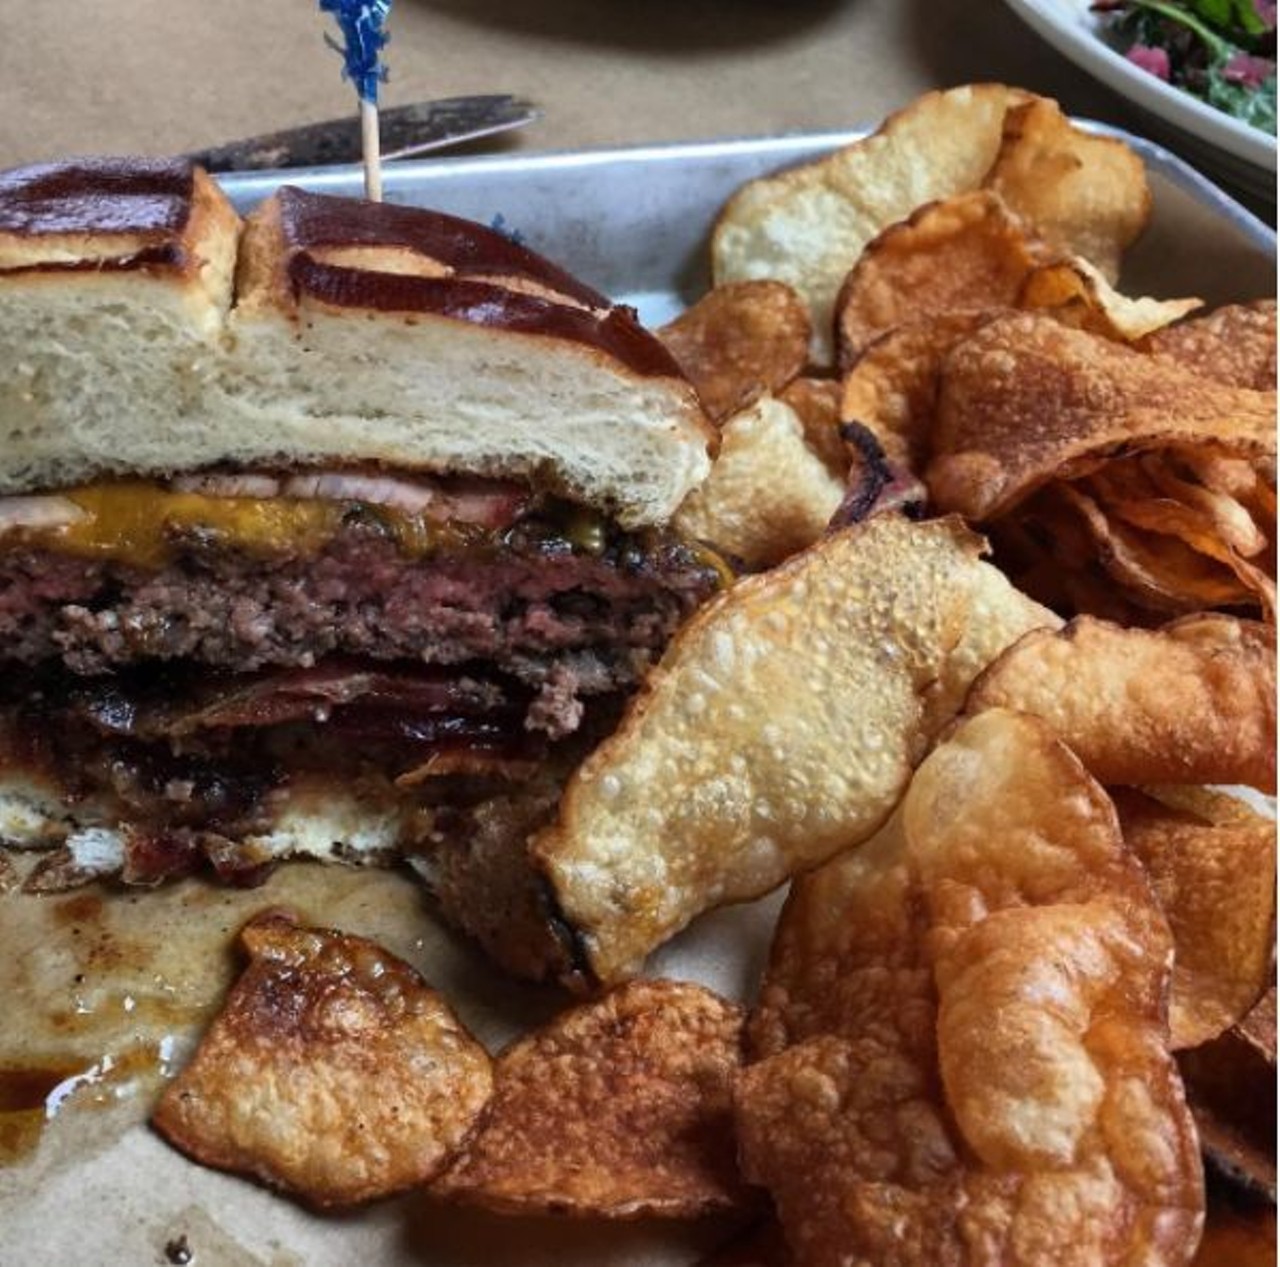 Vinsetta Garage
27799 Woodward Ave, Berkley, MI 48072
Massive burgers, sweet potato fries, and onion mac and cheese make this restaurant a winner. A Detroit-take on average American cuisine. The garage&#146;s menu also offers plenty of vegan and gluten-free options.
(Photo courtesy of @dave_moss on Instagram)